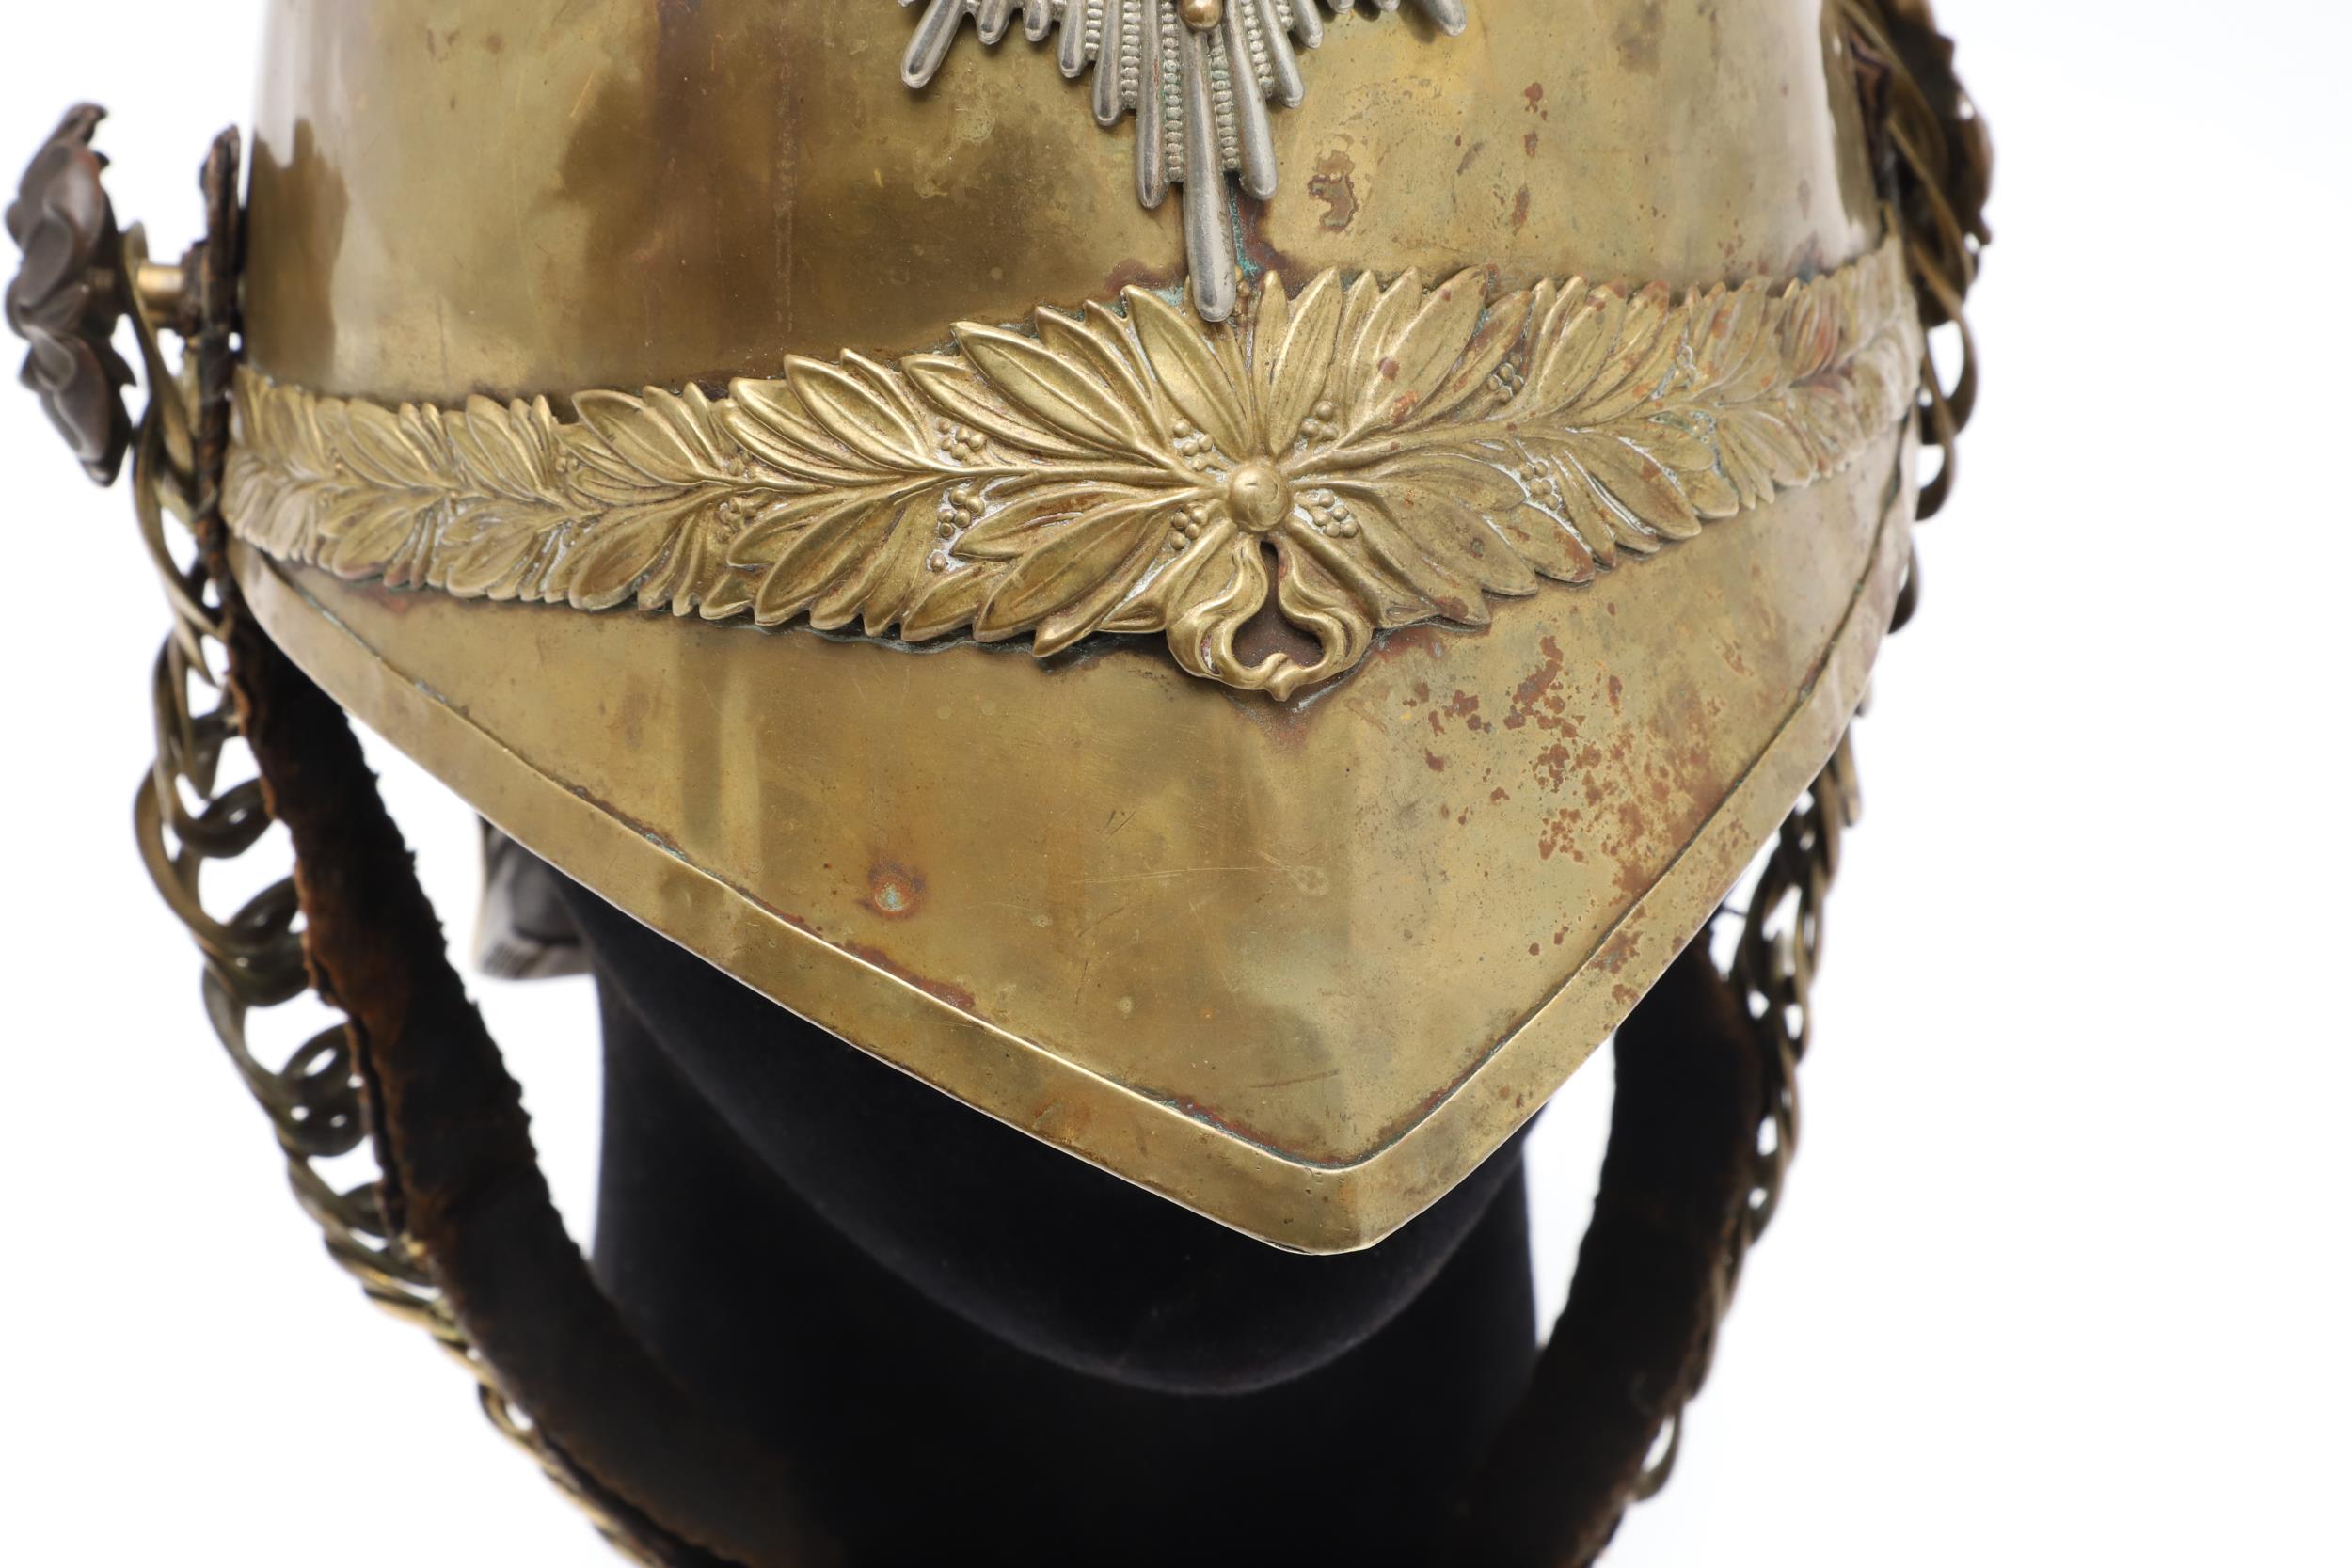 A 1ST DRAGOON GUARDS 1871 PATTERN HELMET. - Image 4 of 15